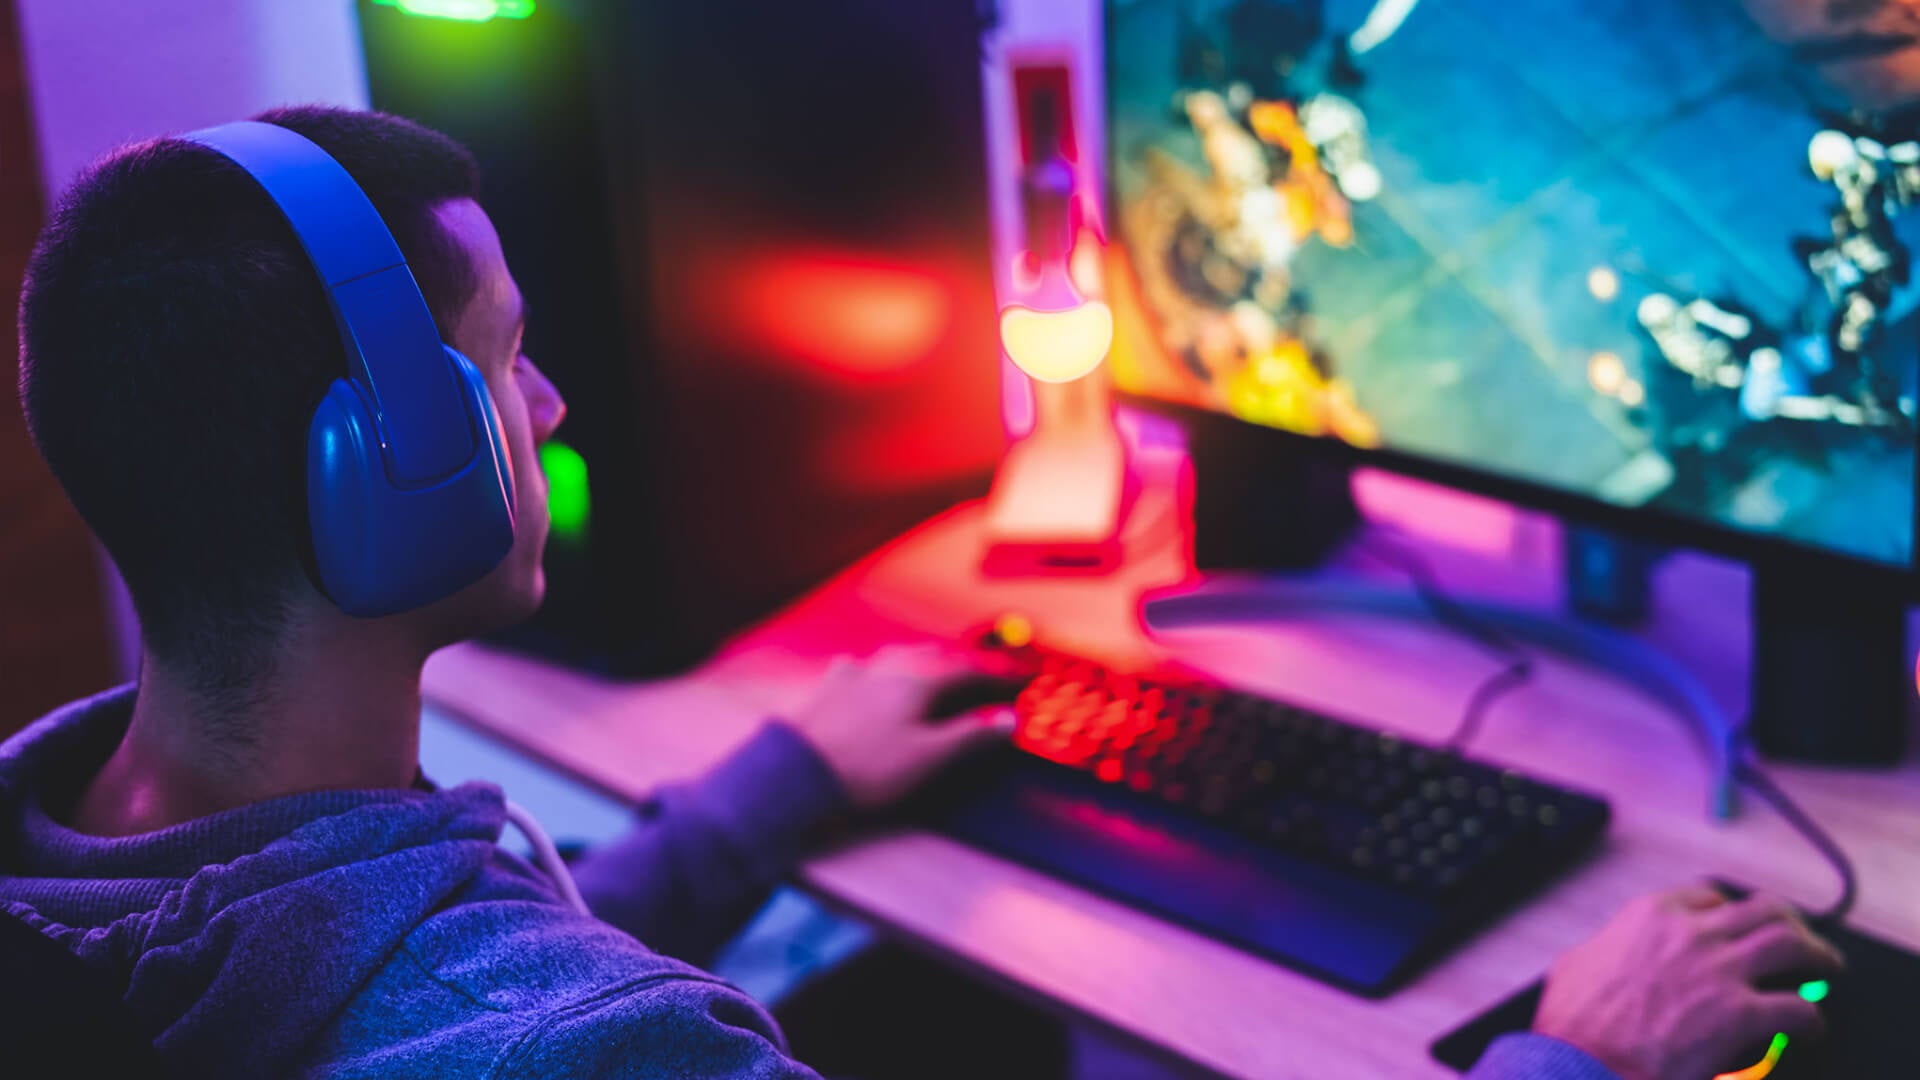 Pro gamer careers to earn his living from gaming